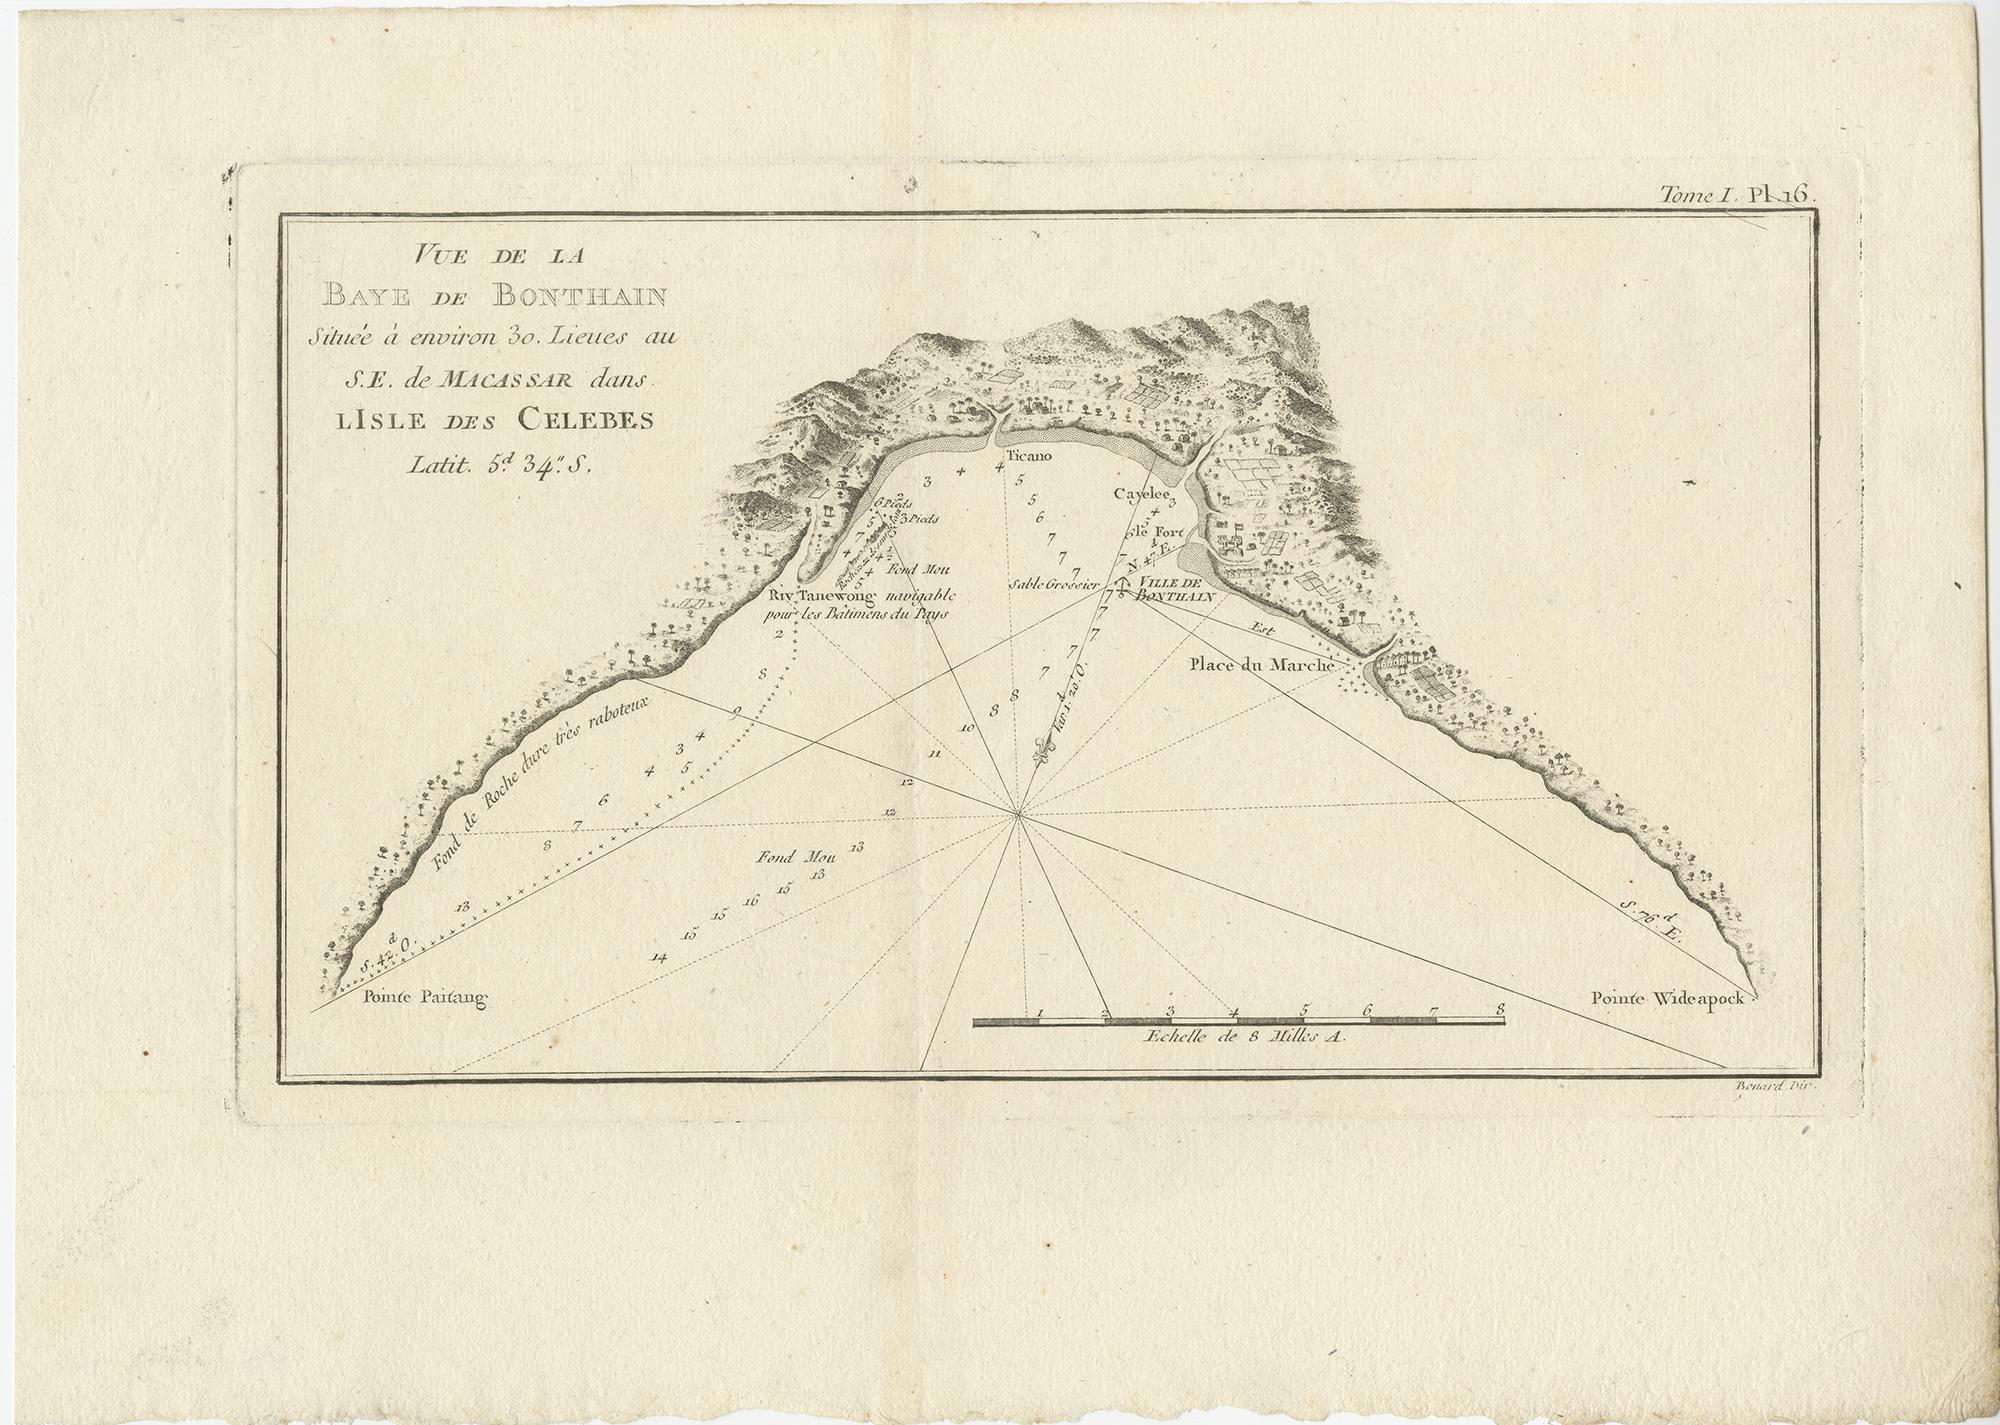 Antique map titled 'Vue de la Baye de Bonthain (..)'. Map of the island Sulawesi (Celebes), Indonesia that Philip Carteret rested his crew and made repairs to his ship the Swallow for 5 months. This map originates from the French edition of 'An